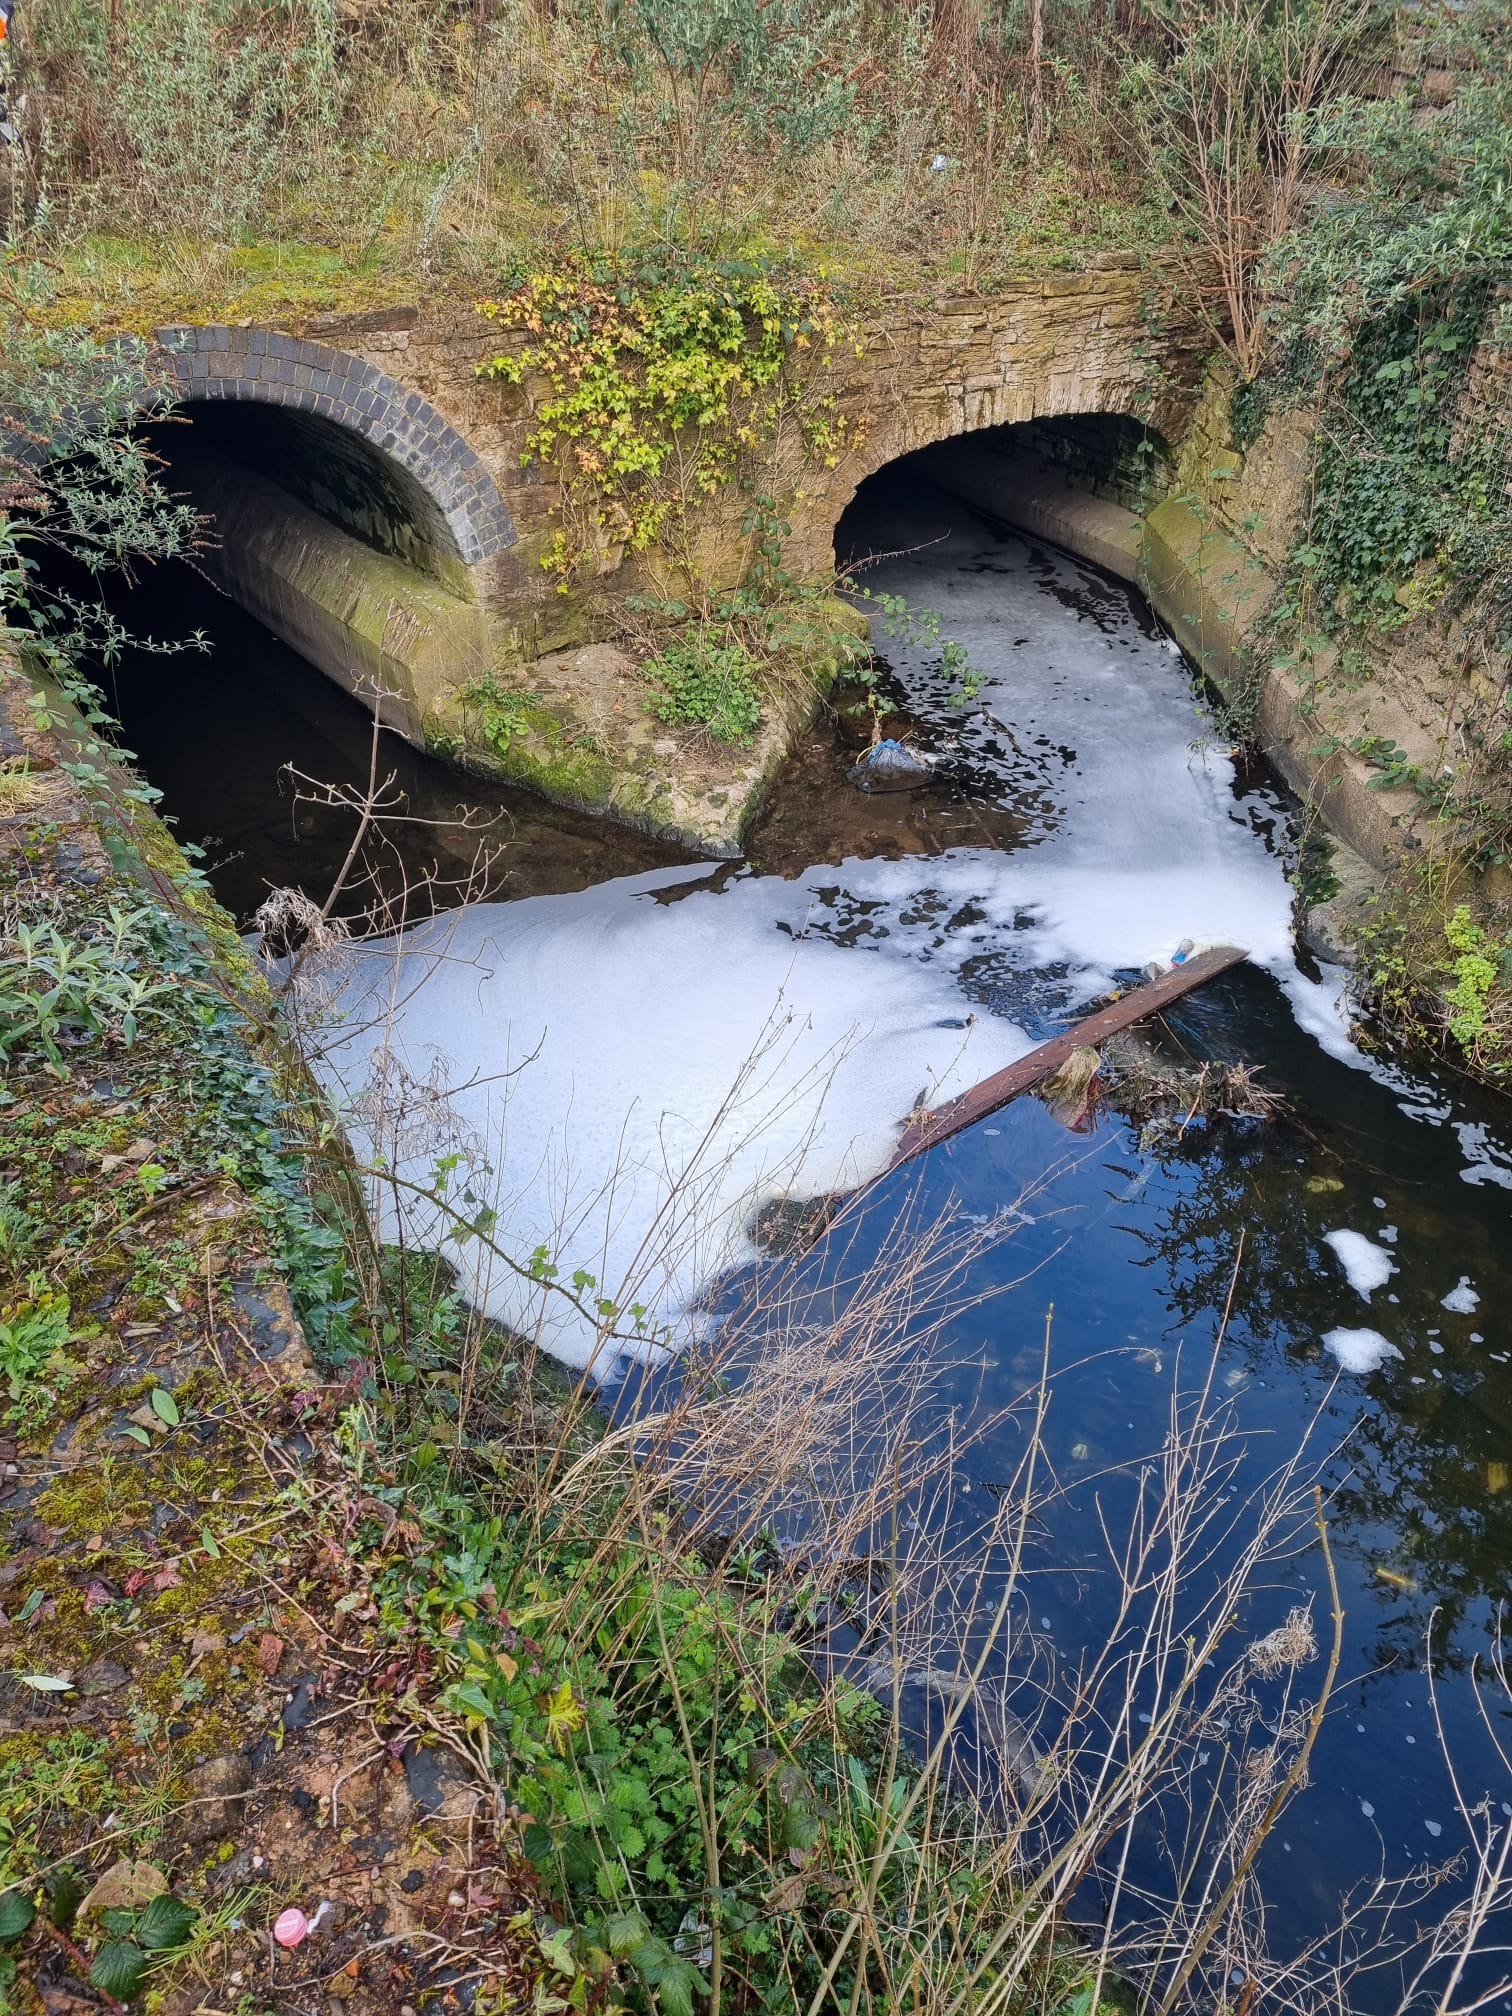 A culvert showing confined spaces